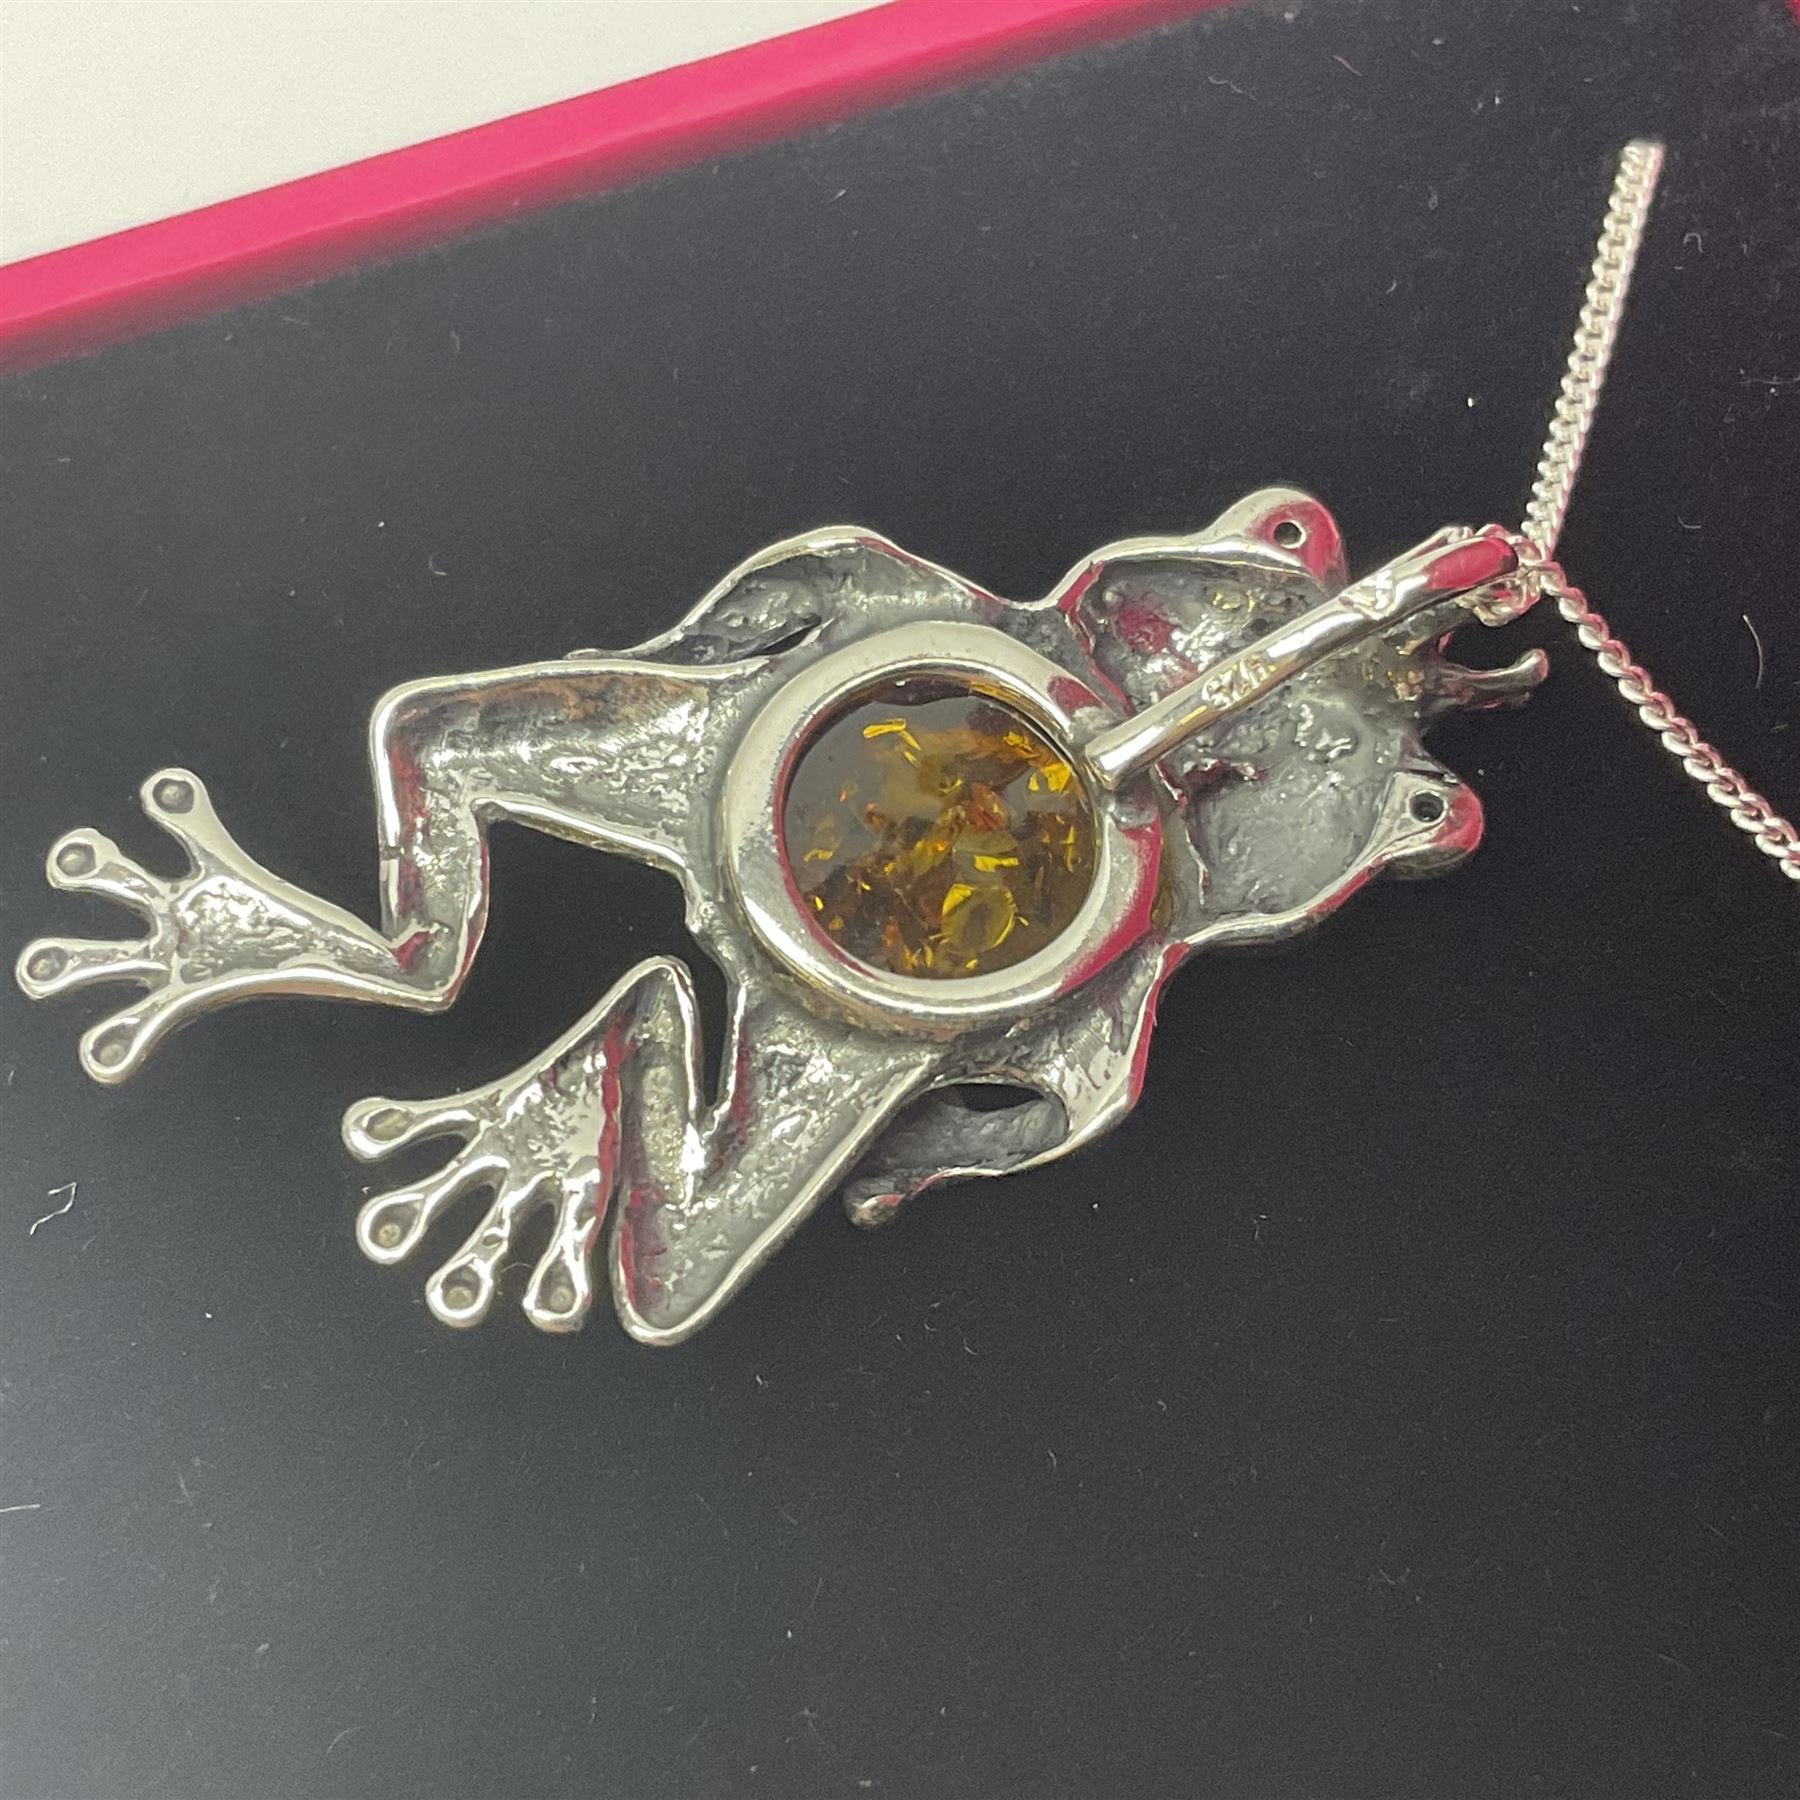 Silver Baltic amber frog prince pendant necklace - Image 4 of 5